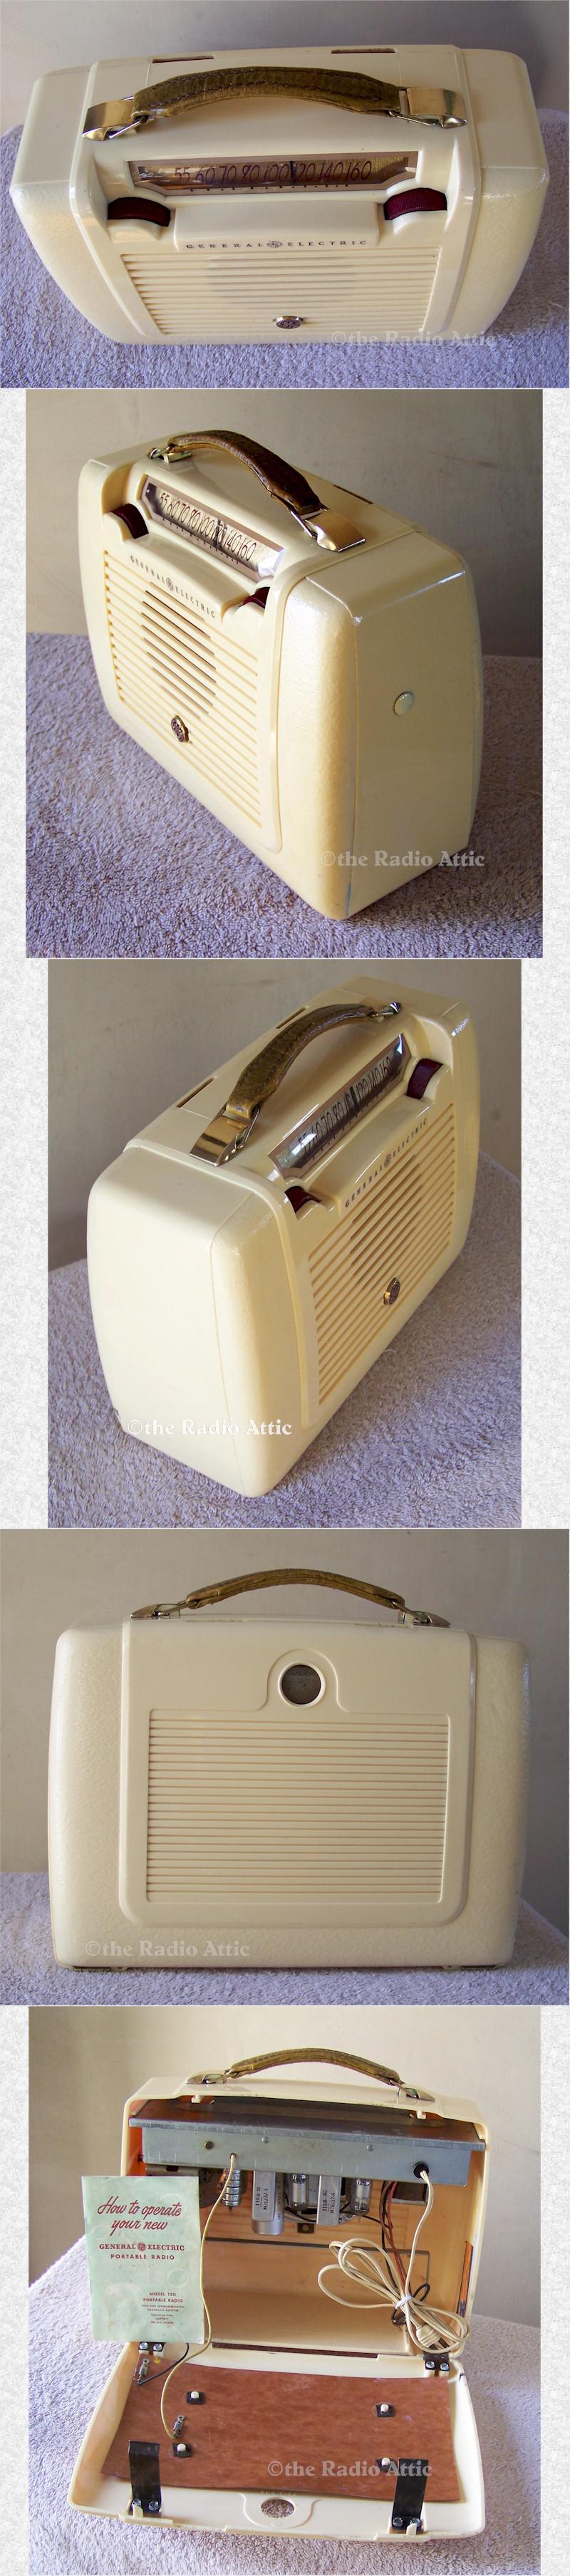 General Electric 150 Portable (1949)